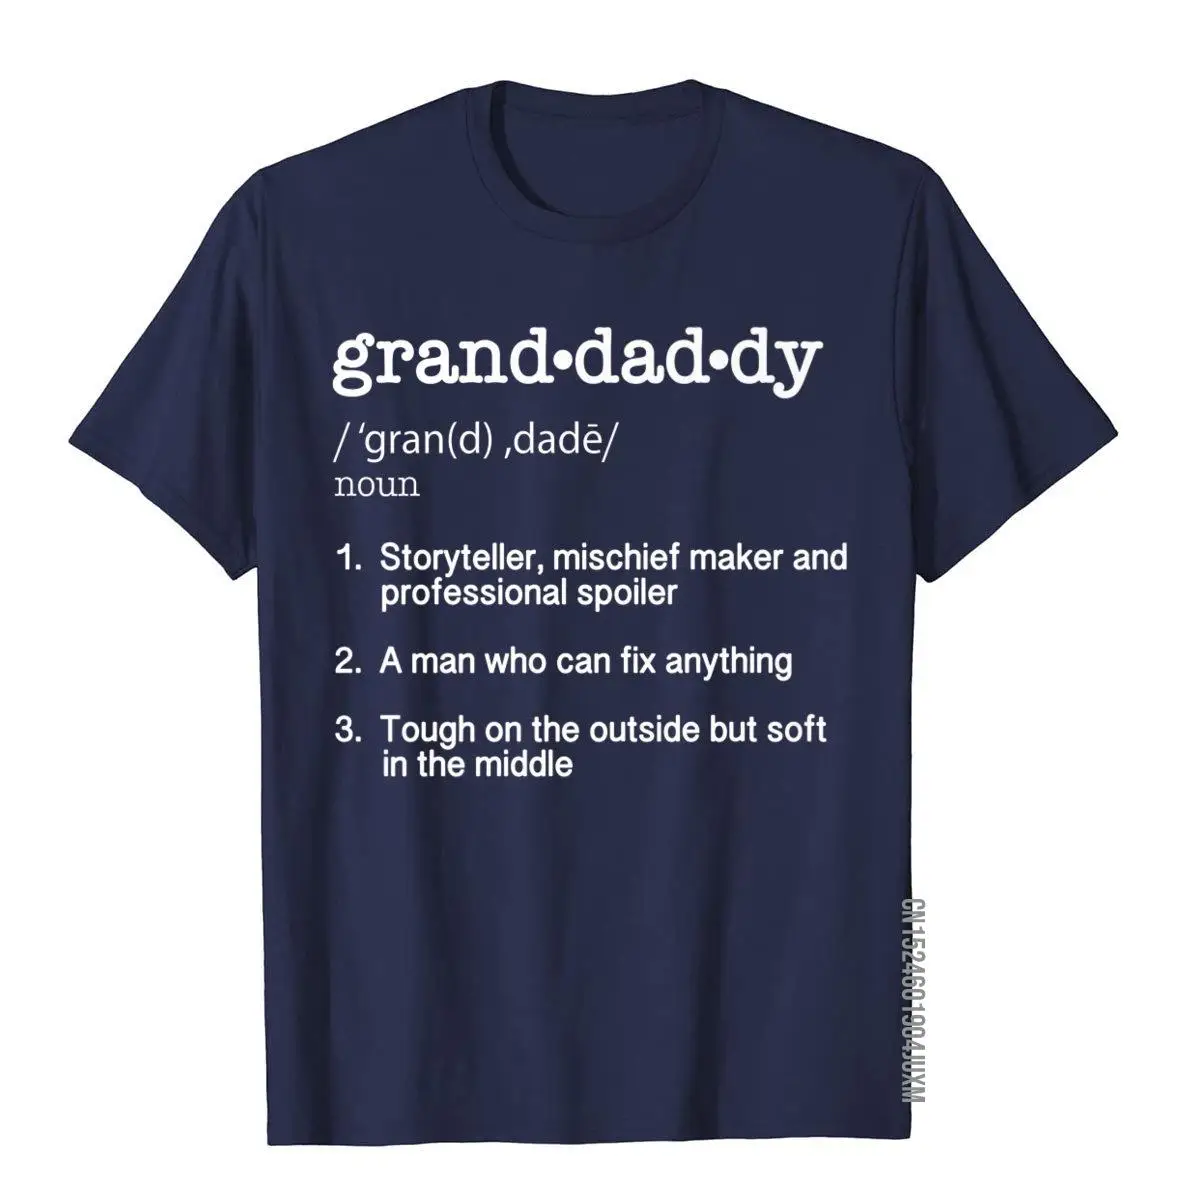 Granddaddy Definition T Shirt - Funny Cool Present Gift Tee__97A1084navy